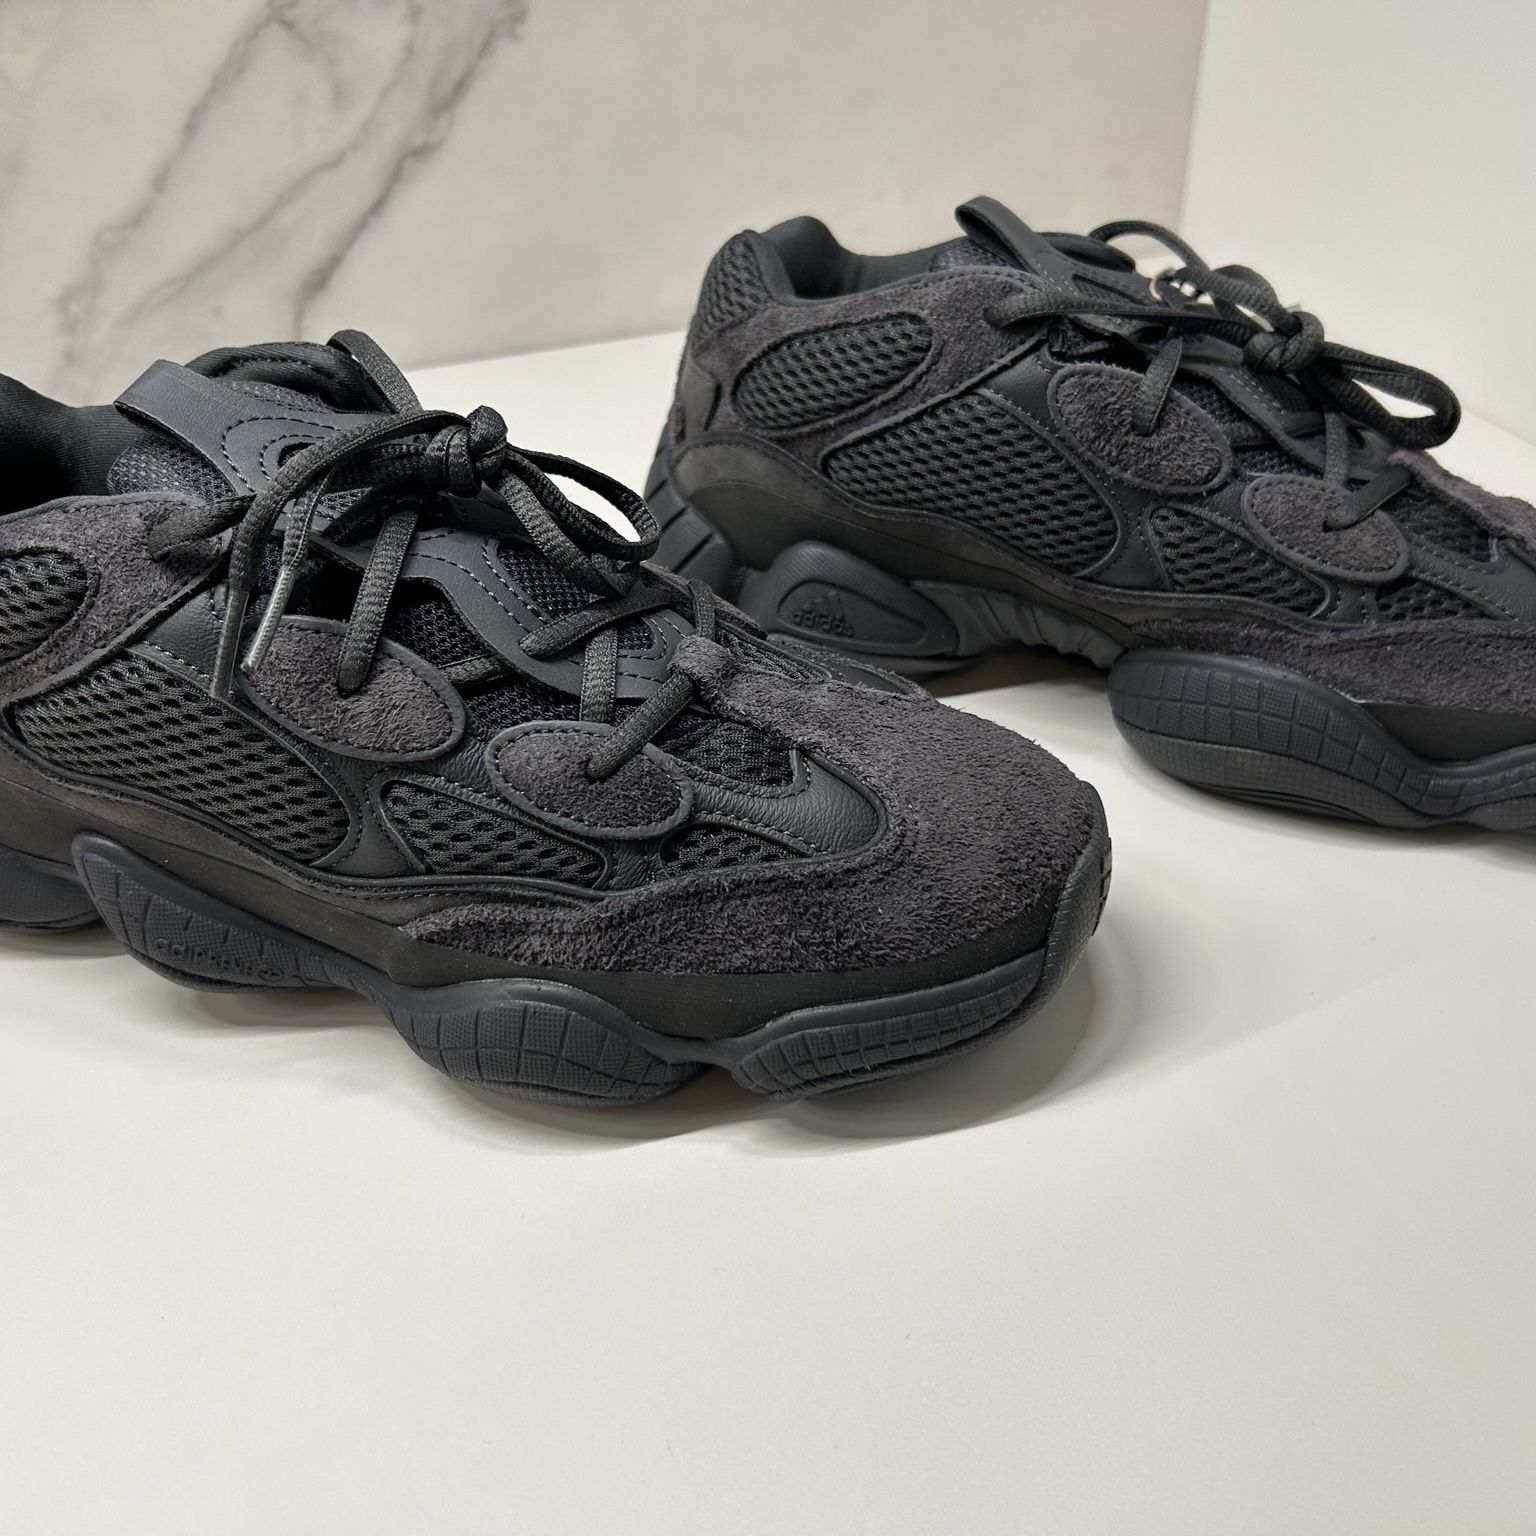 Adidas YEEZY 500 Utility Black 2023 for Sale in Leander, TX - OfferUp